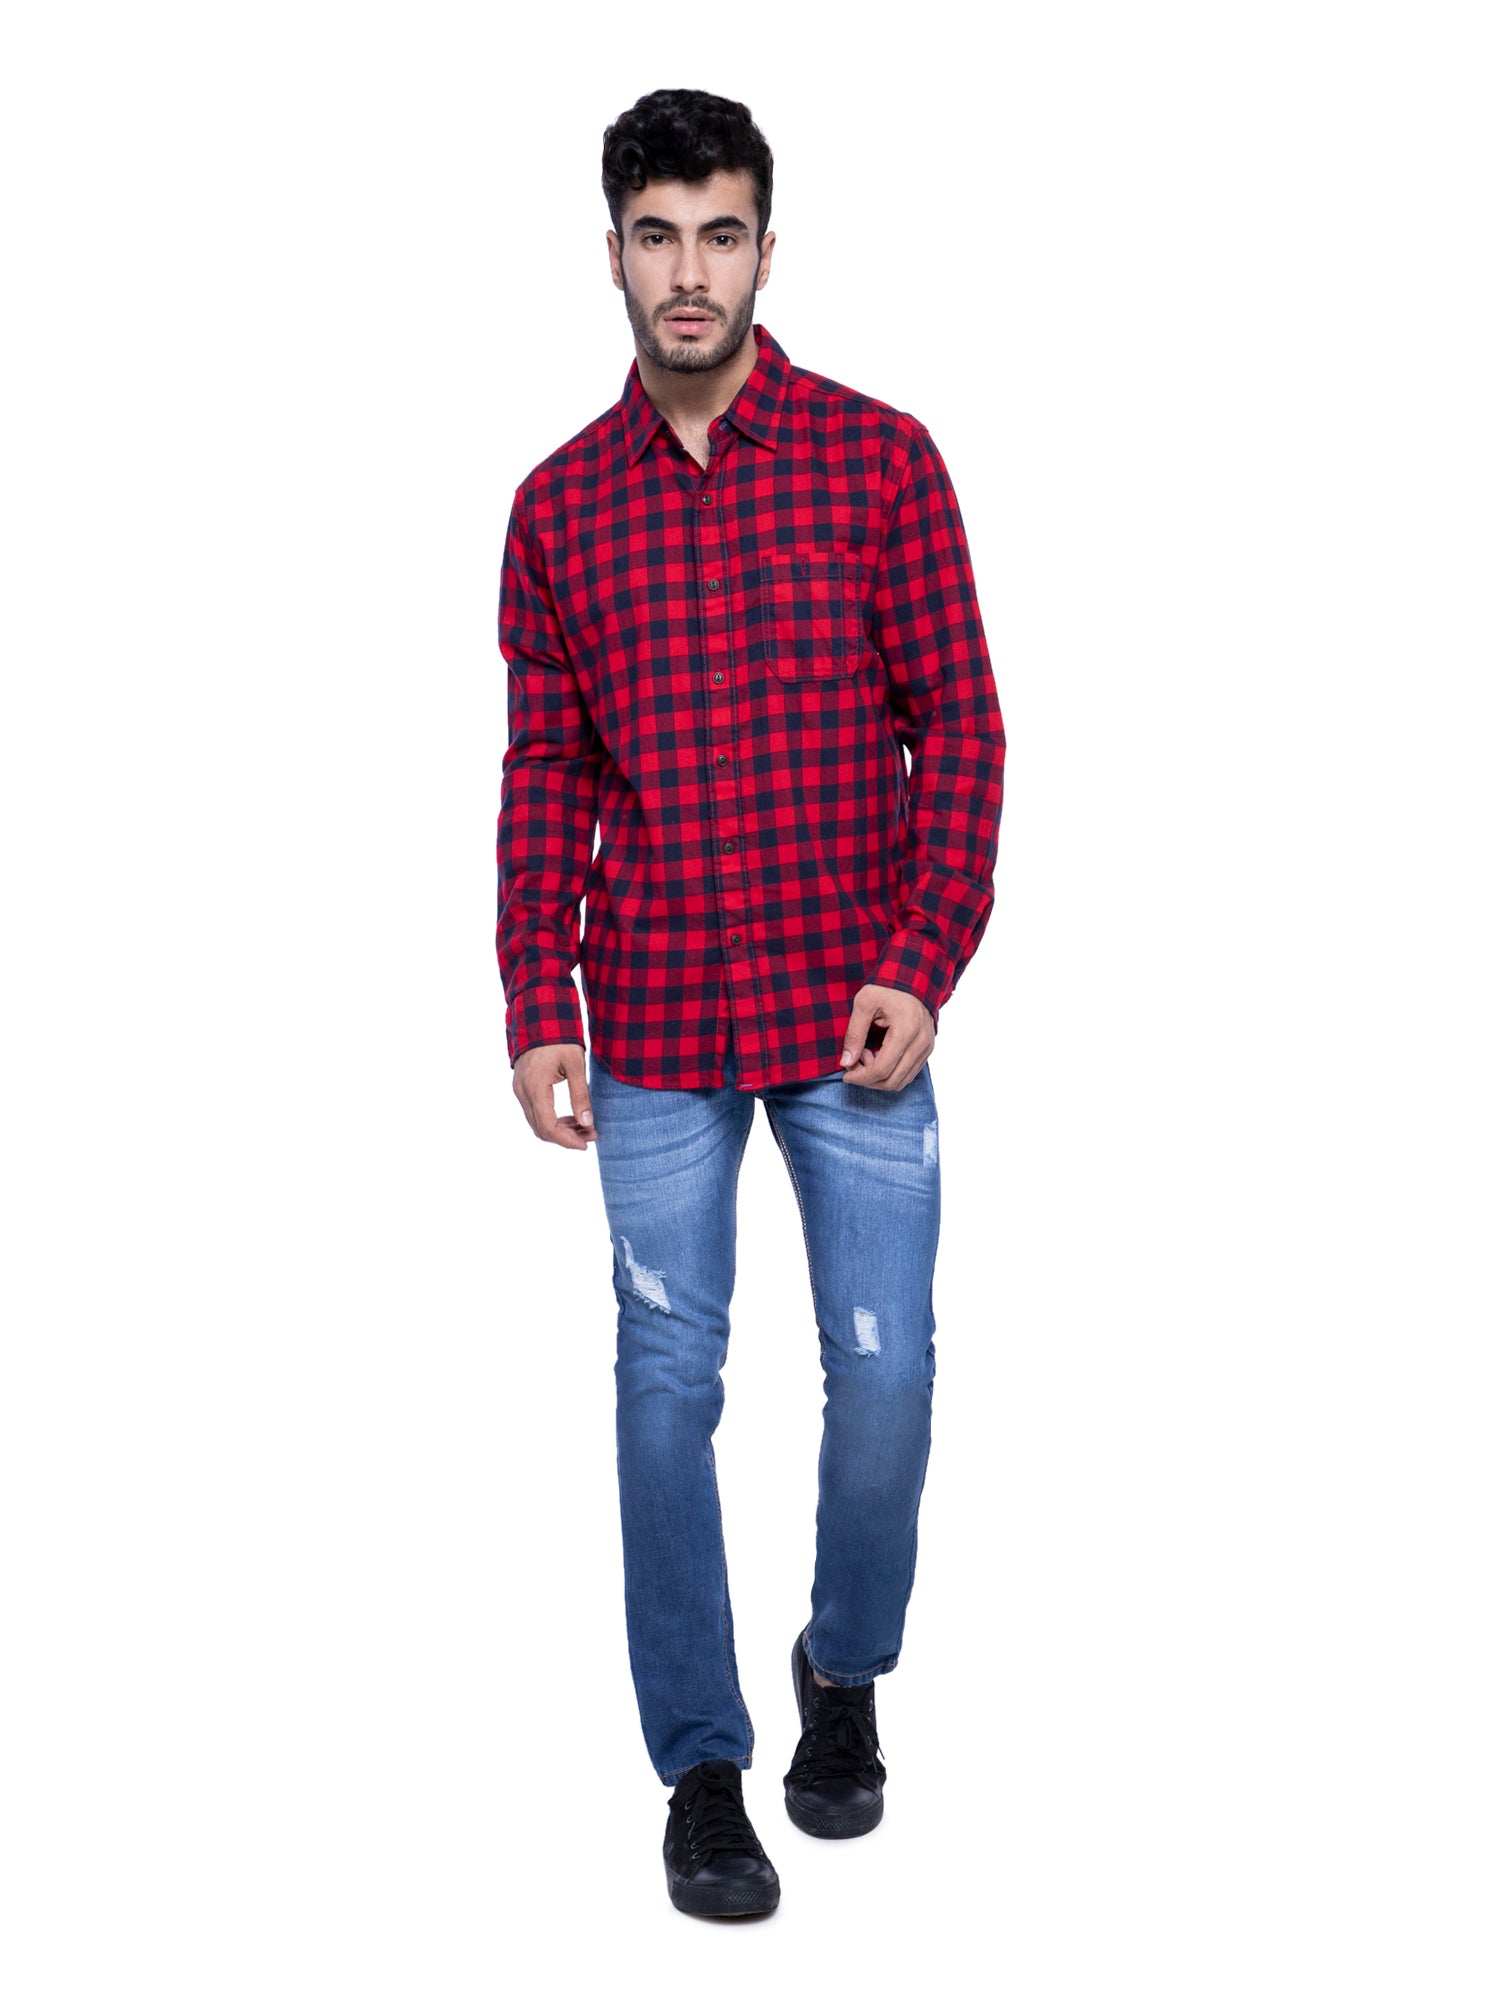 red checkered shirt outfit men